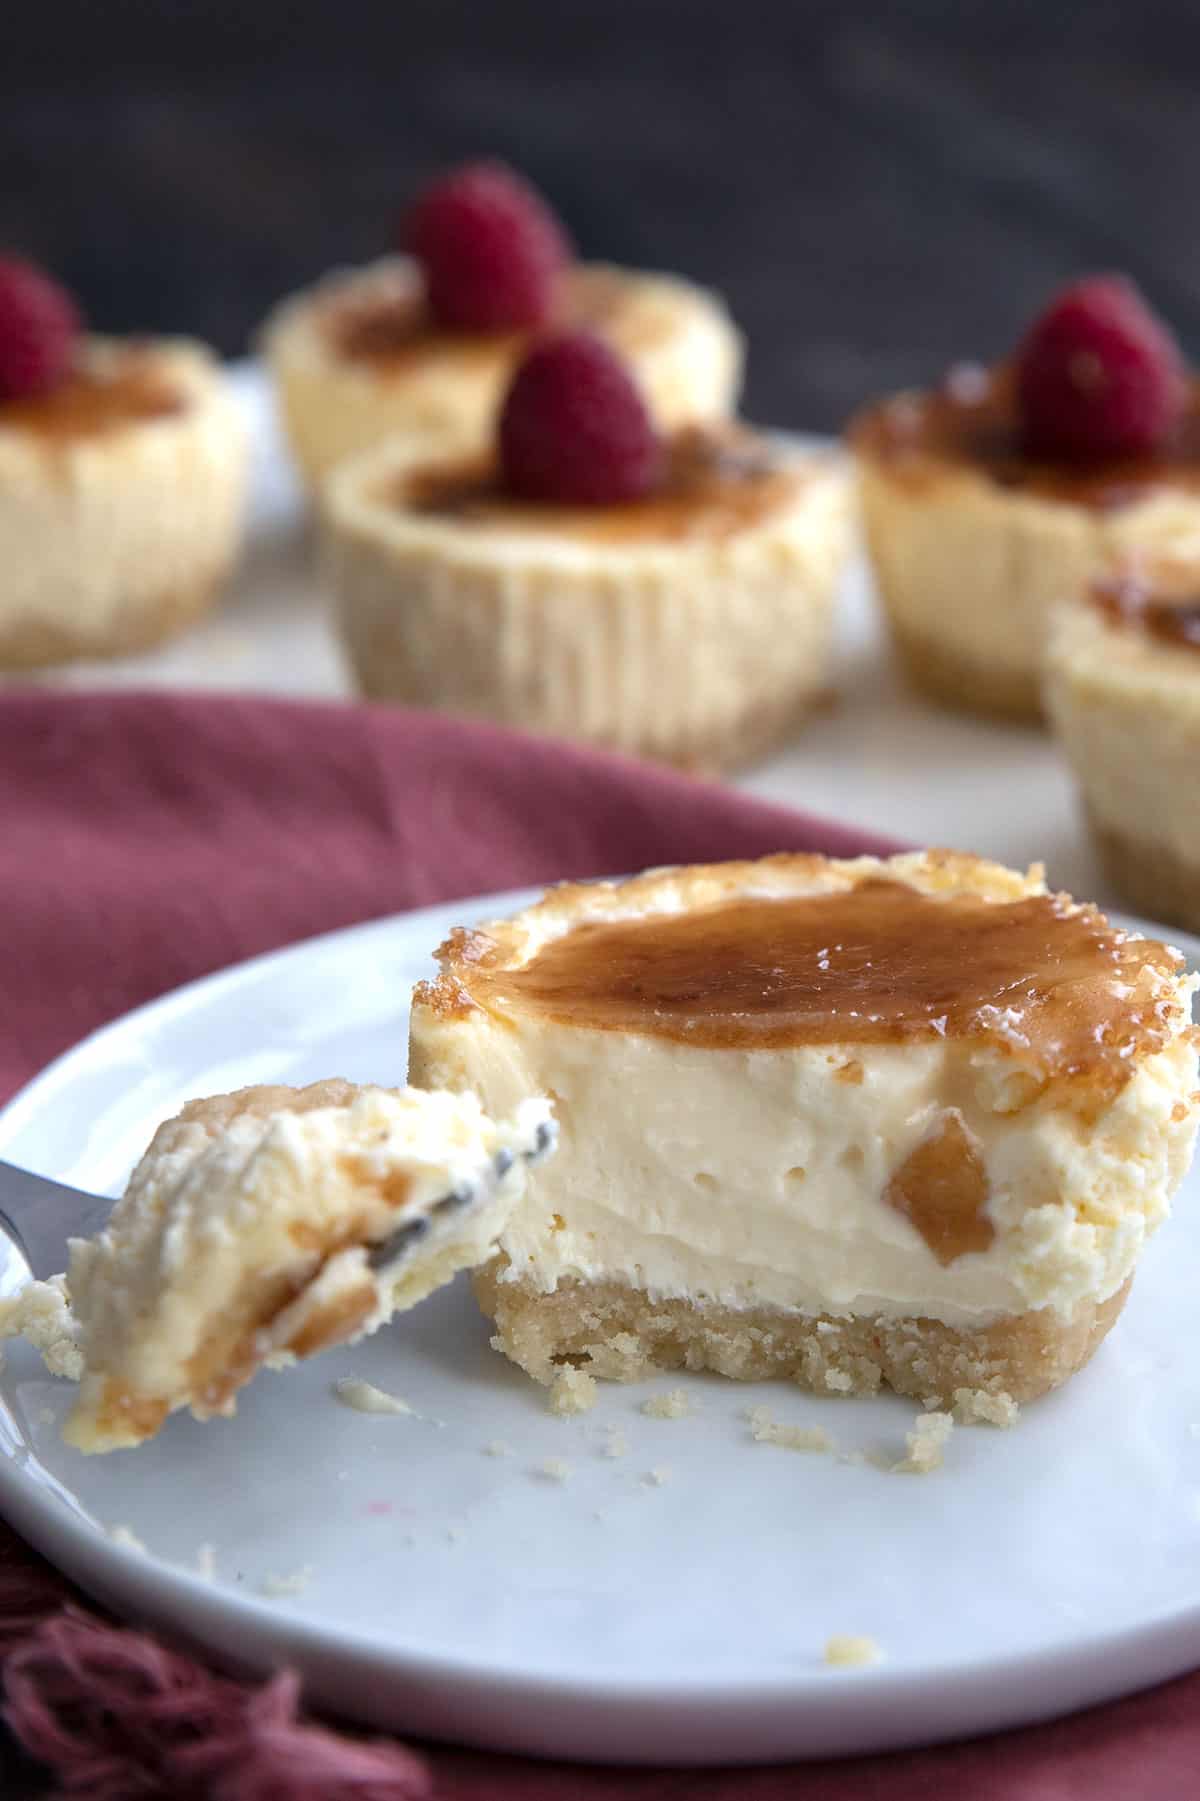 A mini keto cheesecake with creme brûlée topping with a forkful taken out.